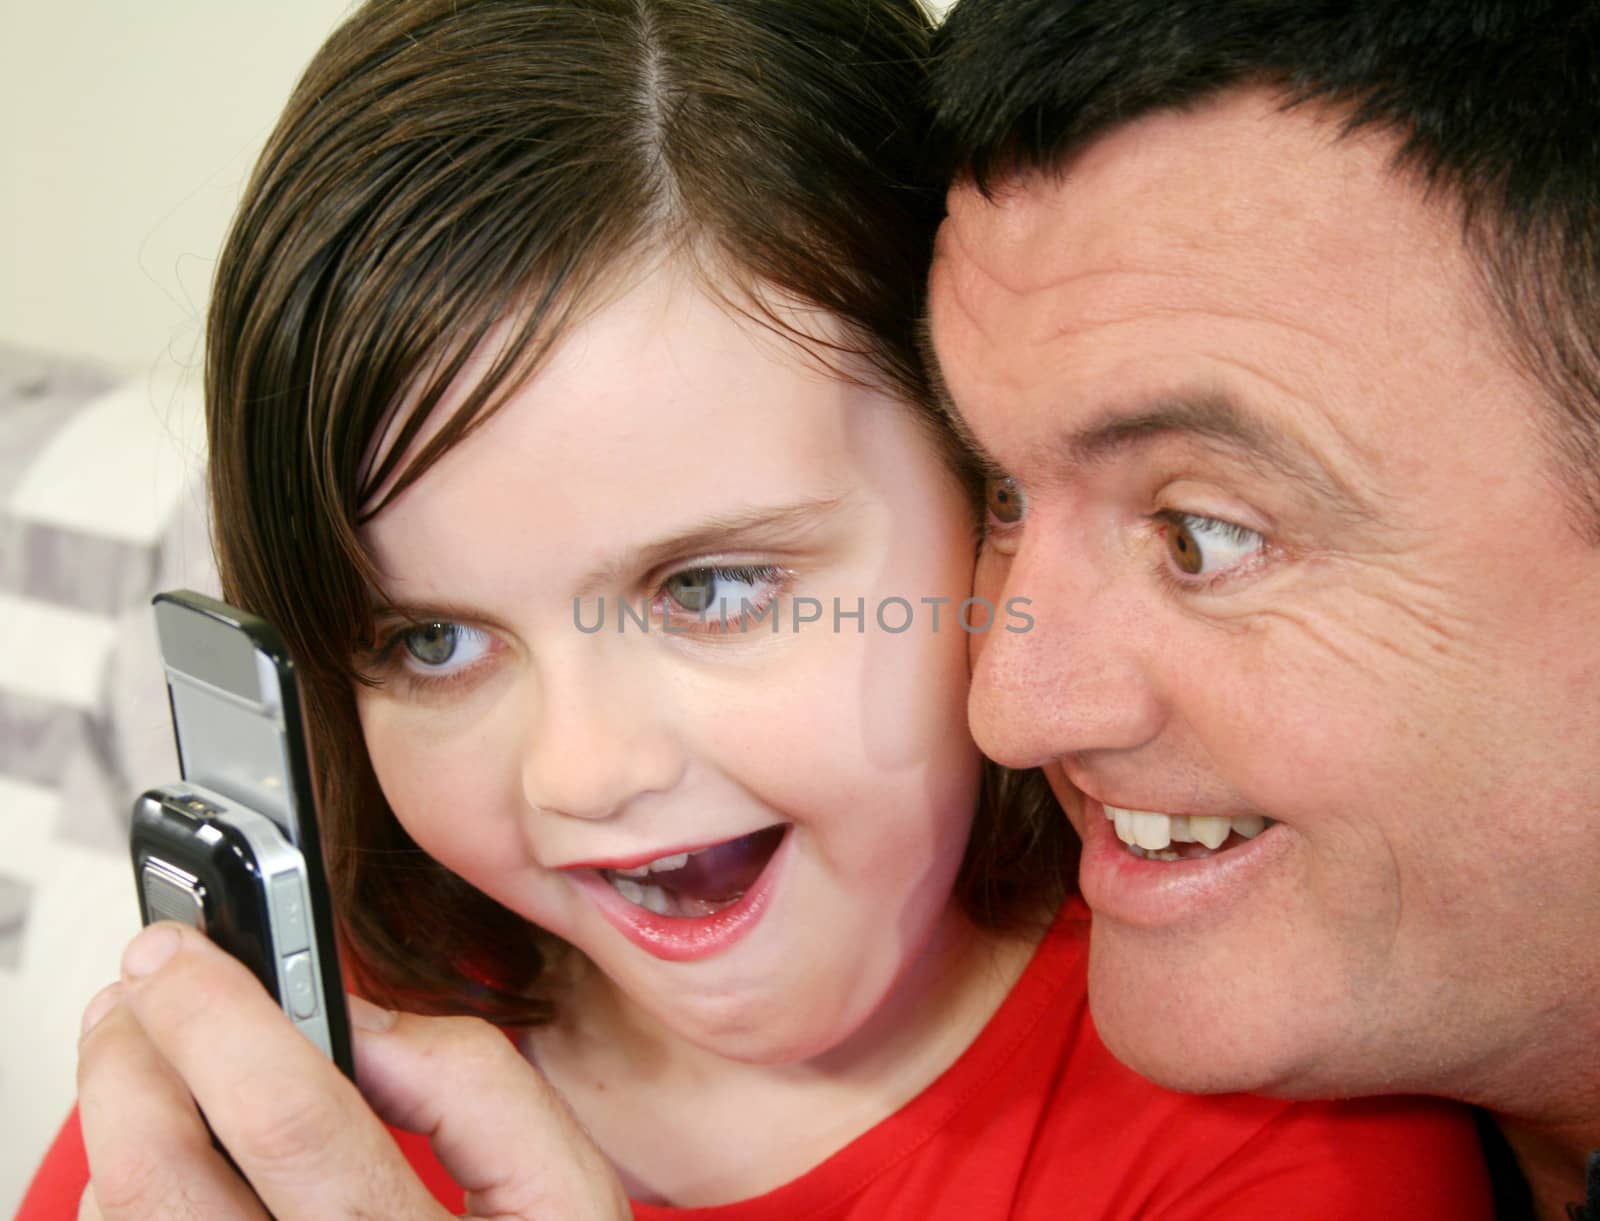 Father and young daughter play a game on her cell phone.